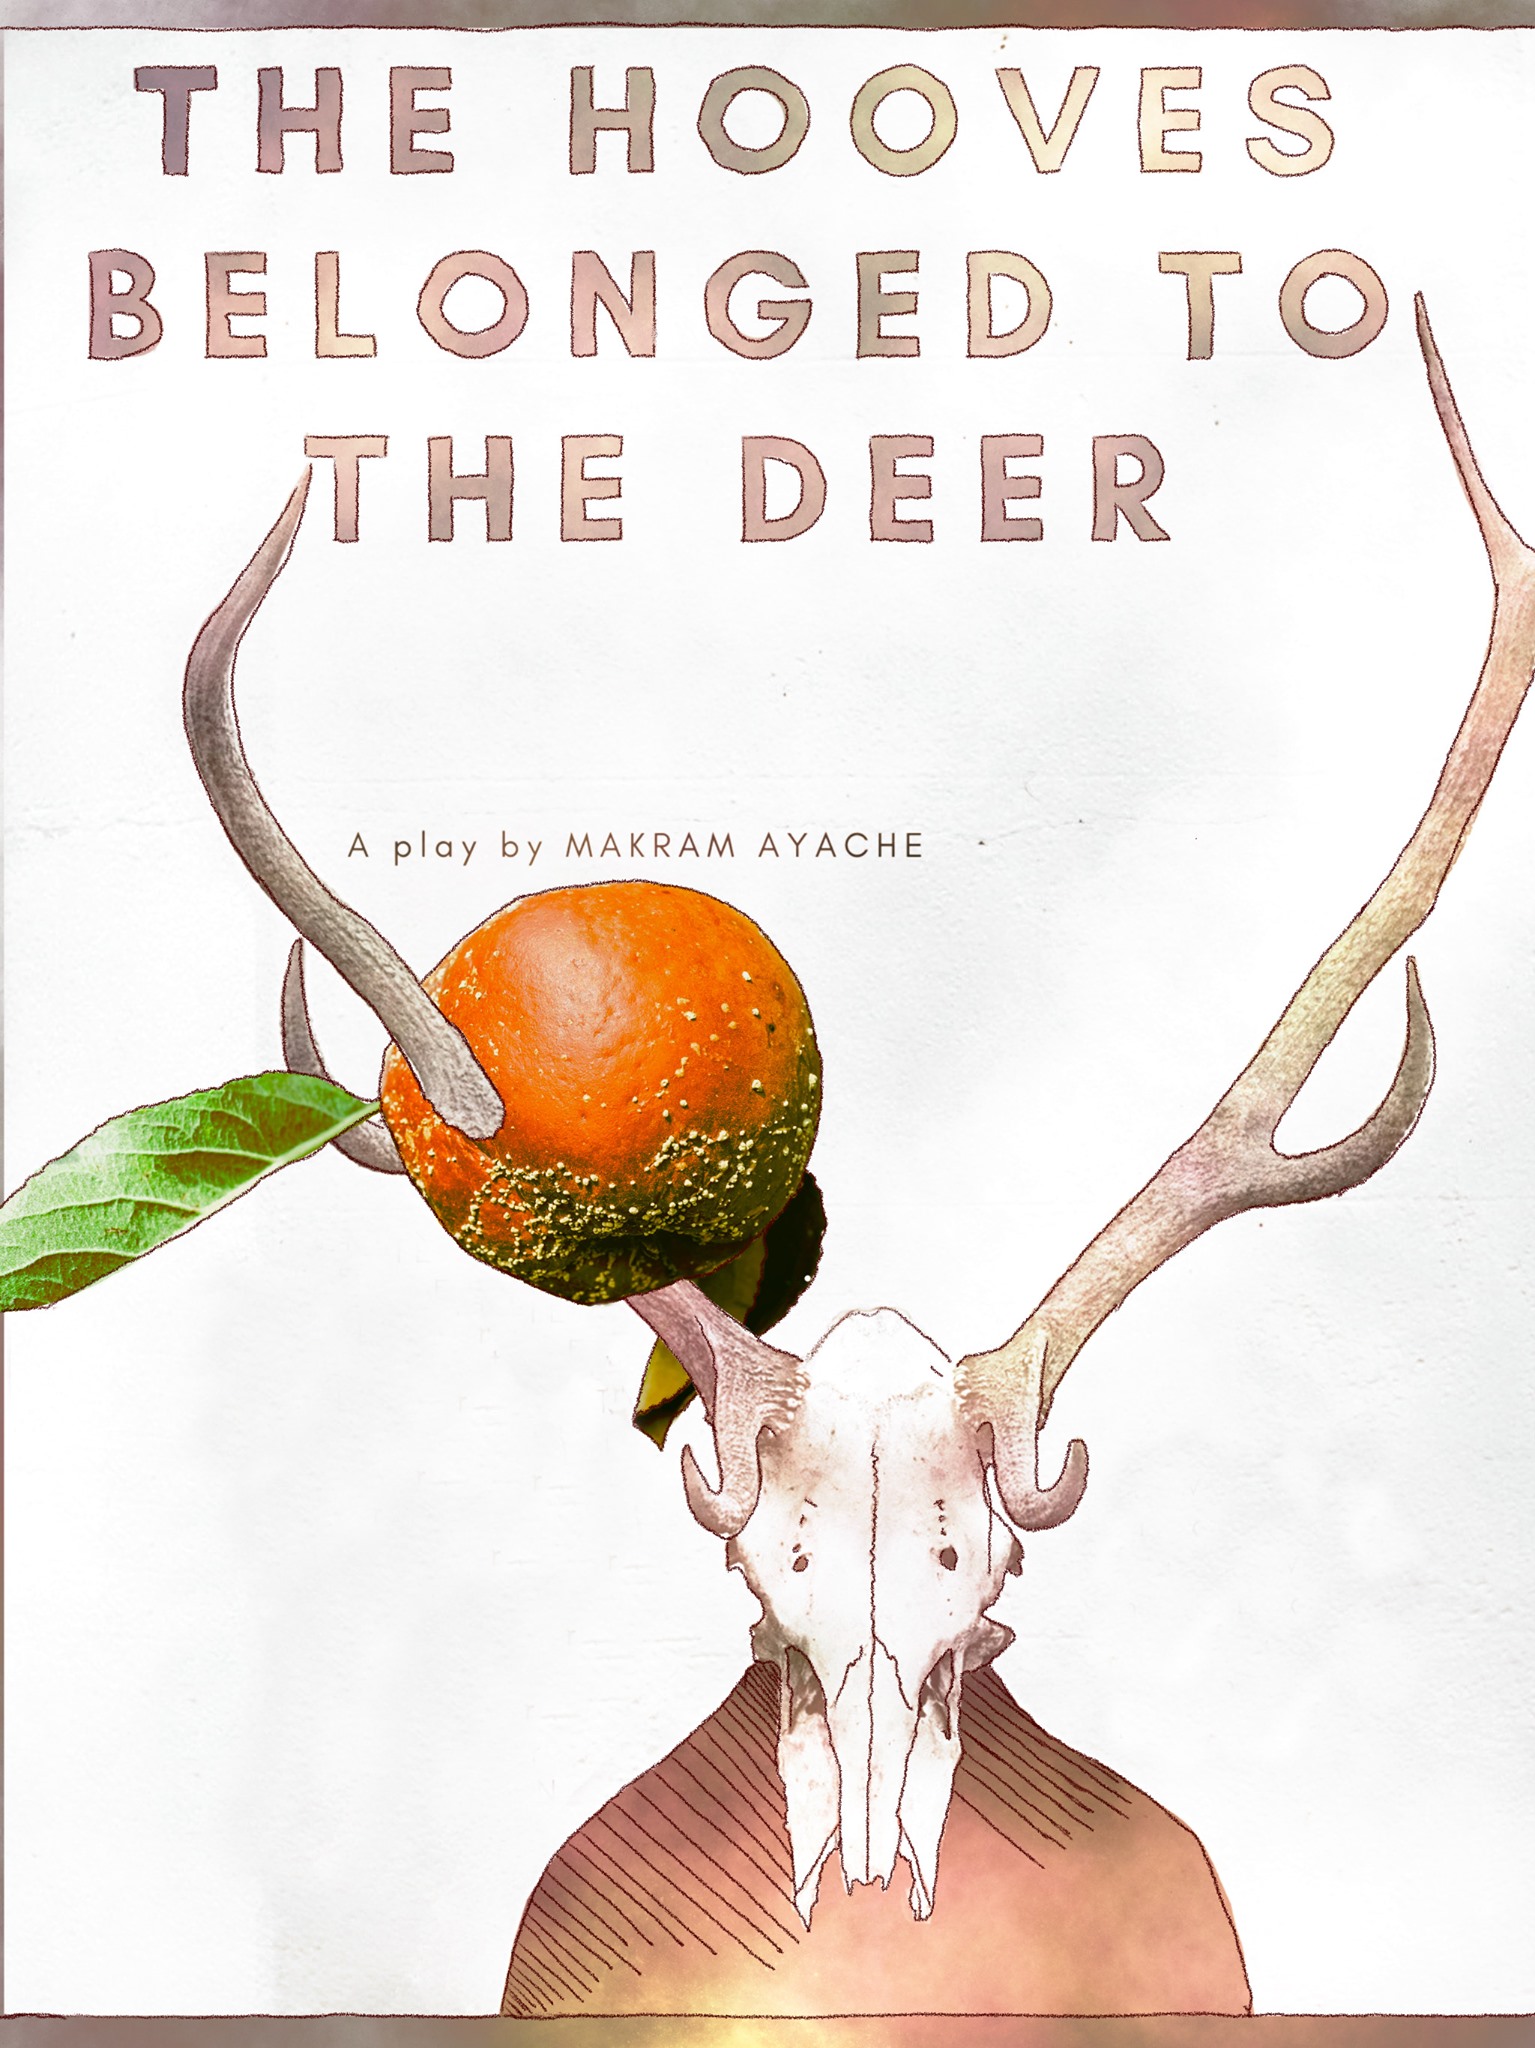 A poster for "The Hooves Belonged to the Deer" The title appears on top, with "a play by Makram Ayache" written in smaller text underneath. Below the text is an illustration of a figure wearing a deer skull with antlers. One of the antlers spears a reddish-orange fruit with a large green leaf.